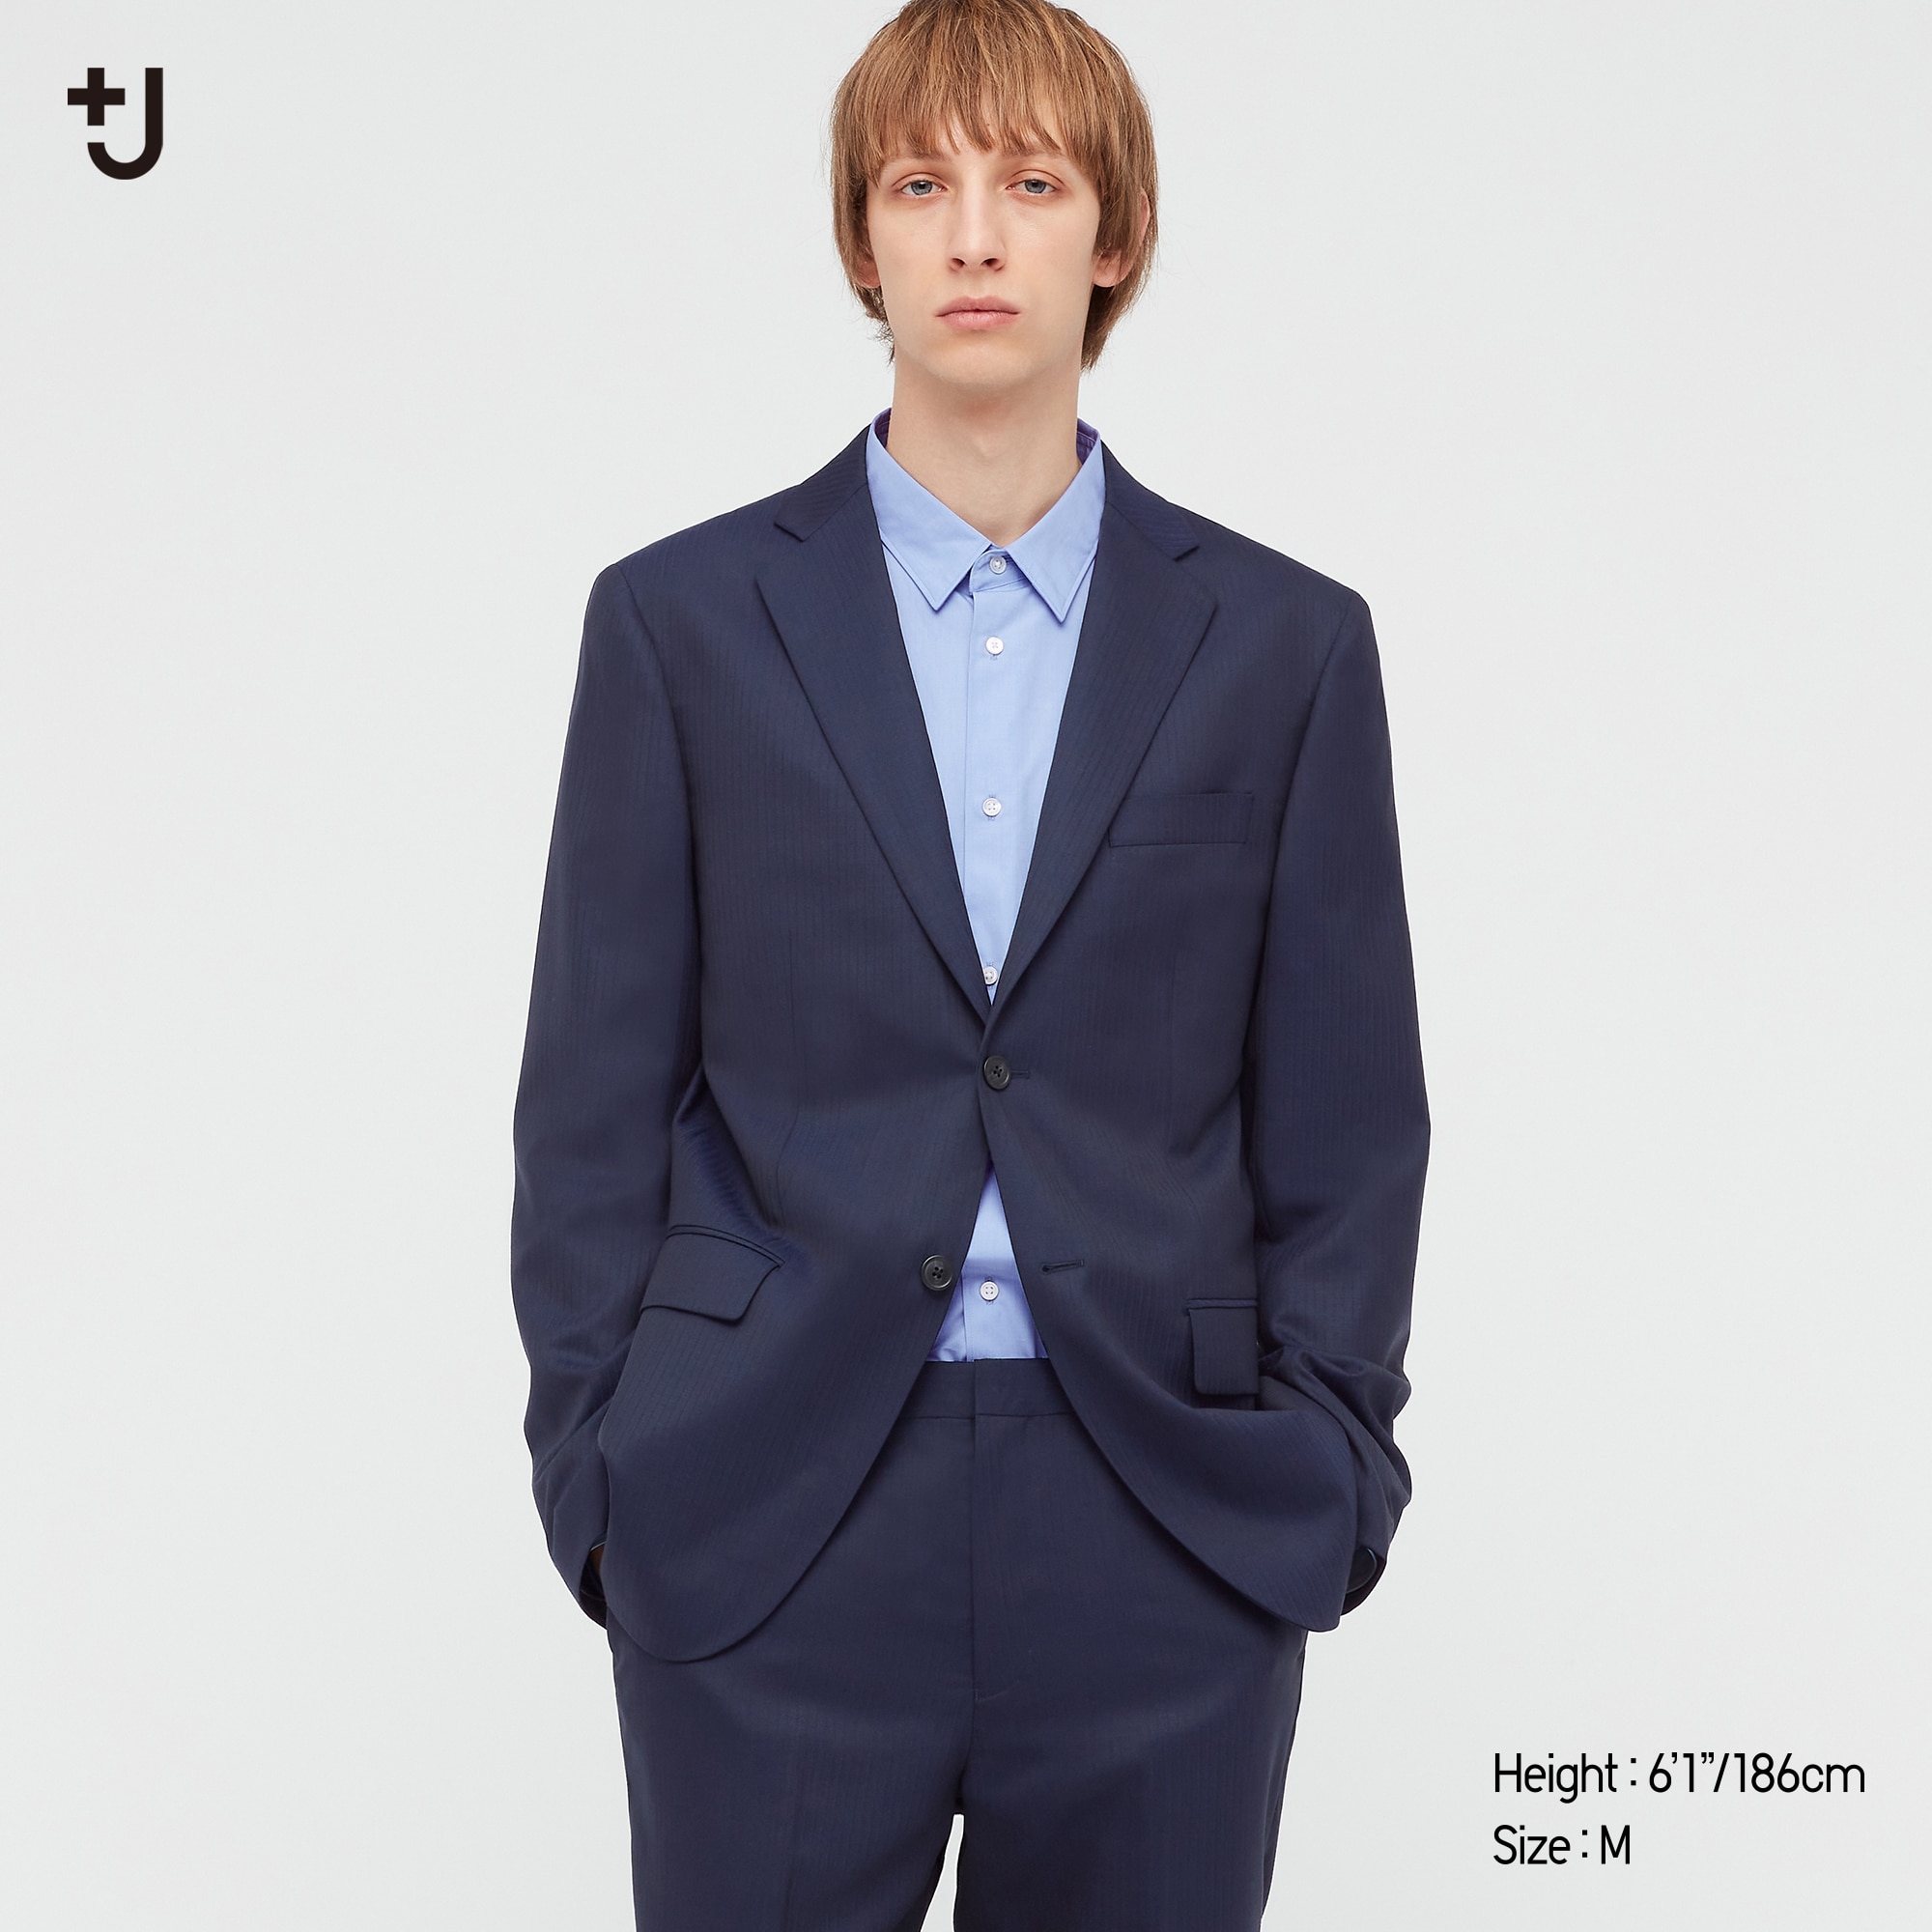 The Uniqlo  J collection designed by Jil Sander